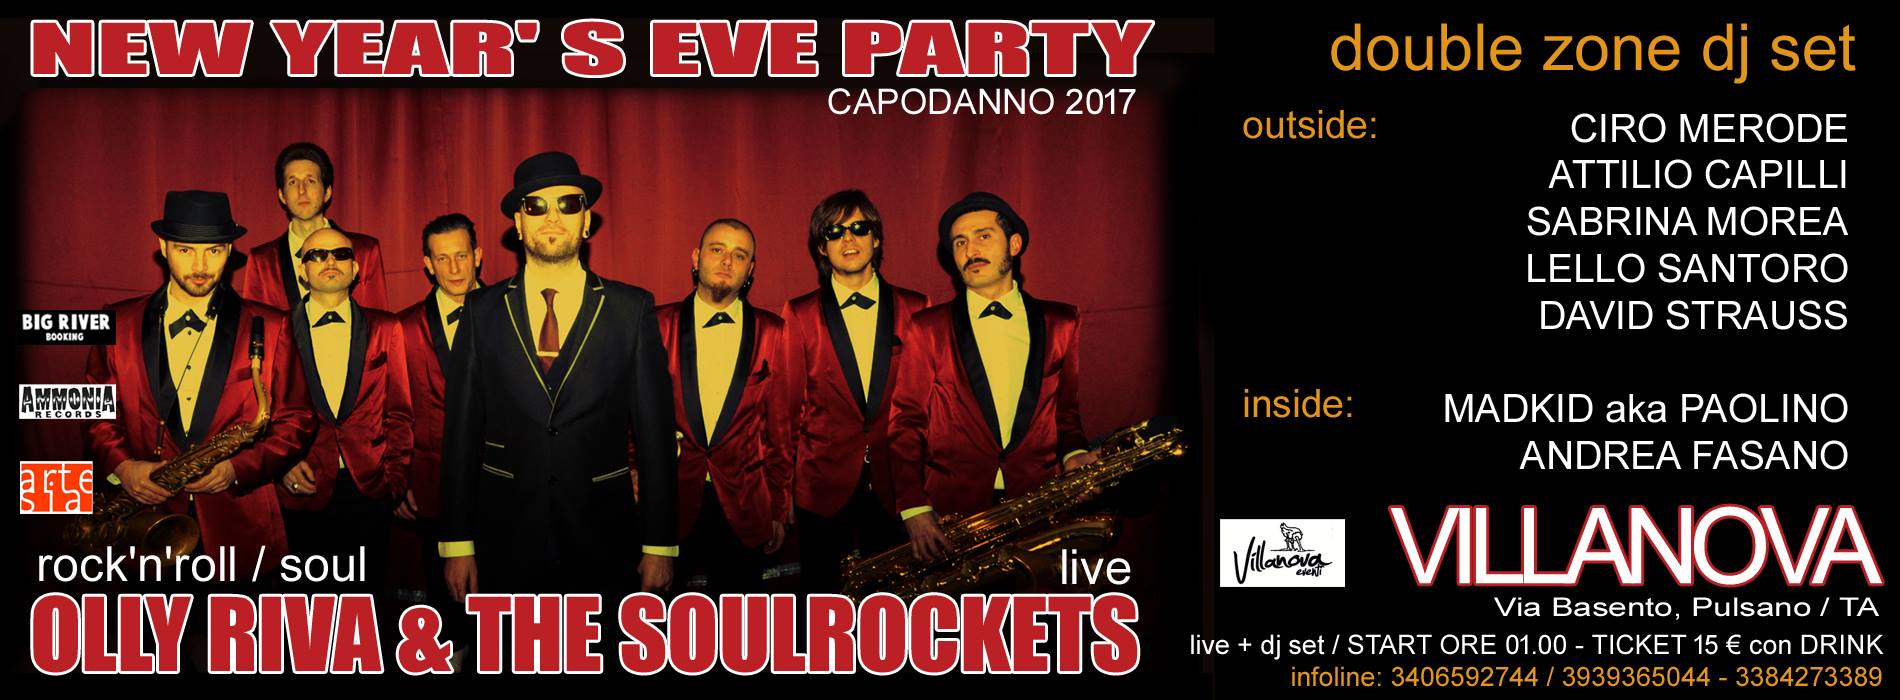 New Year's Eve Party / Capodanno 2017